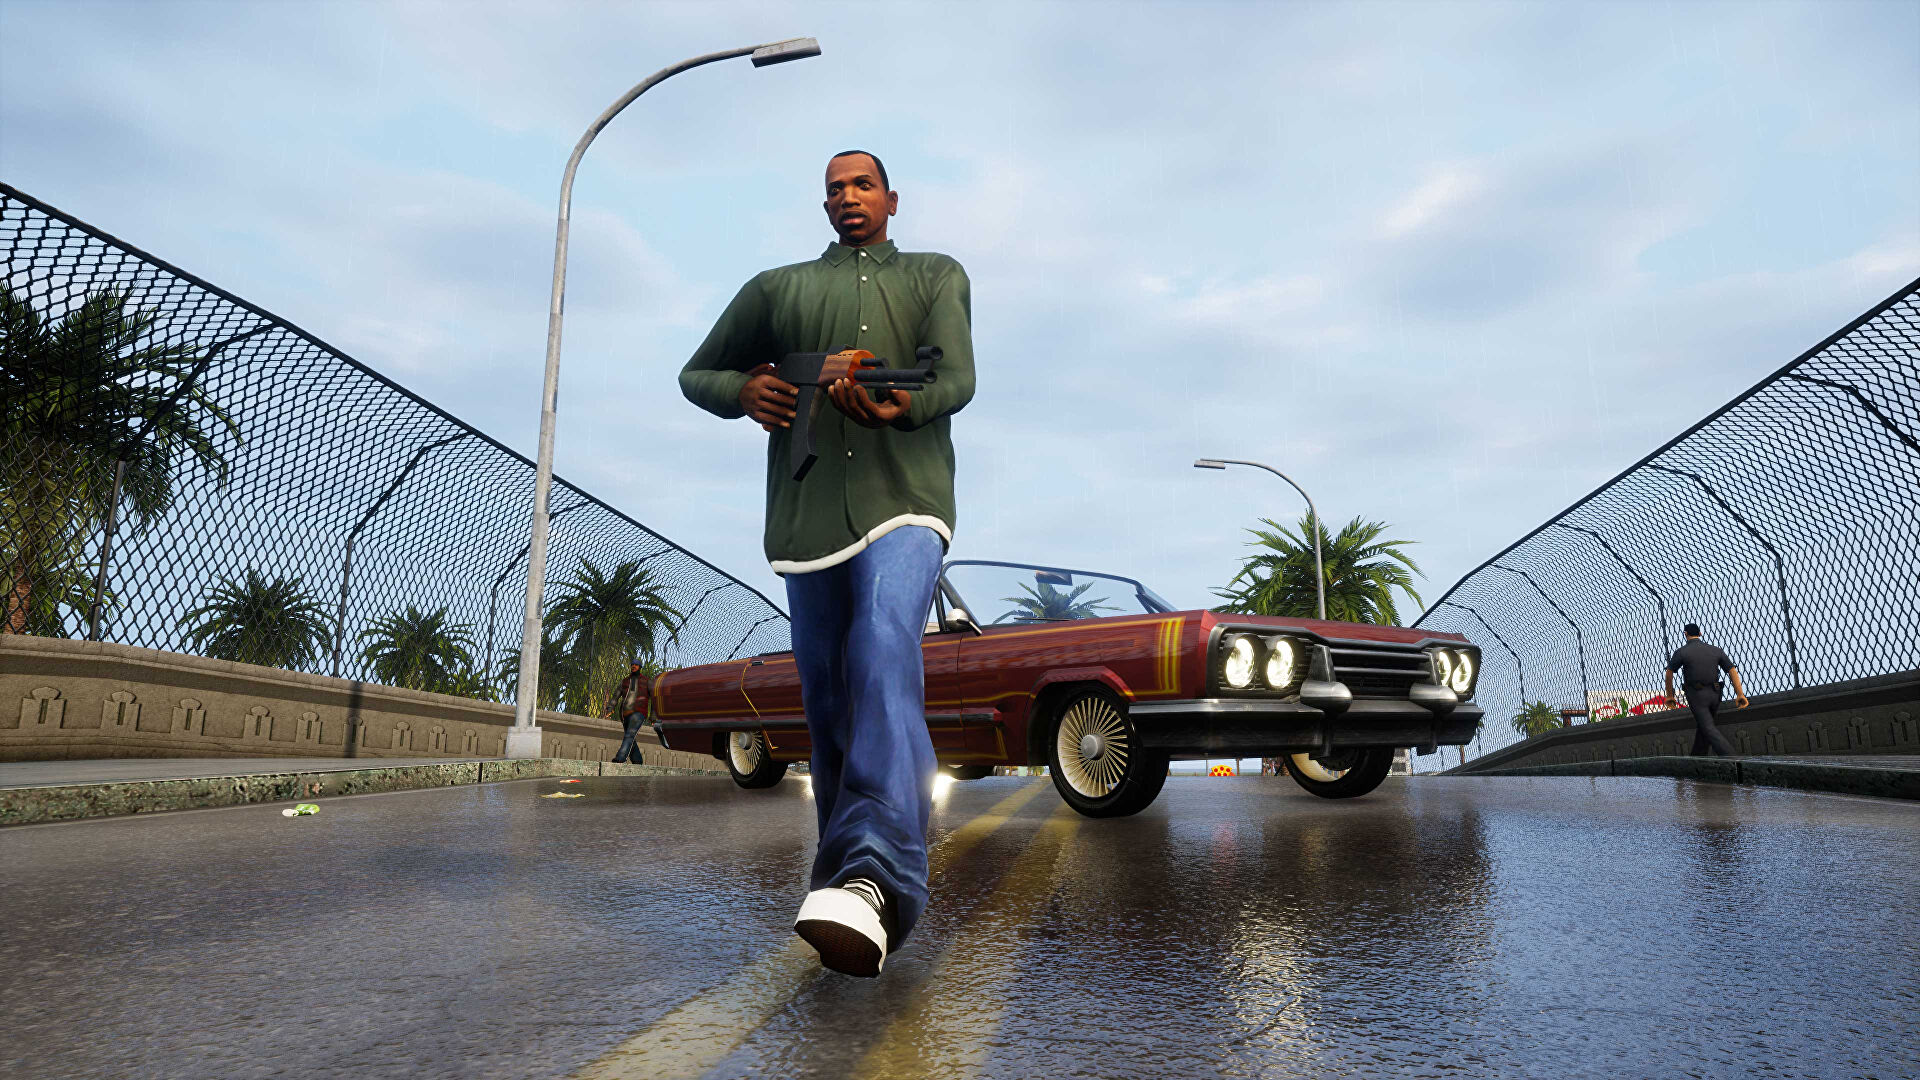 Grand Theft Auto Trilogy finally returns to Steam, with 50% off